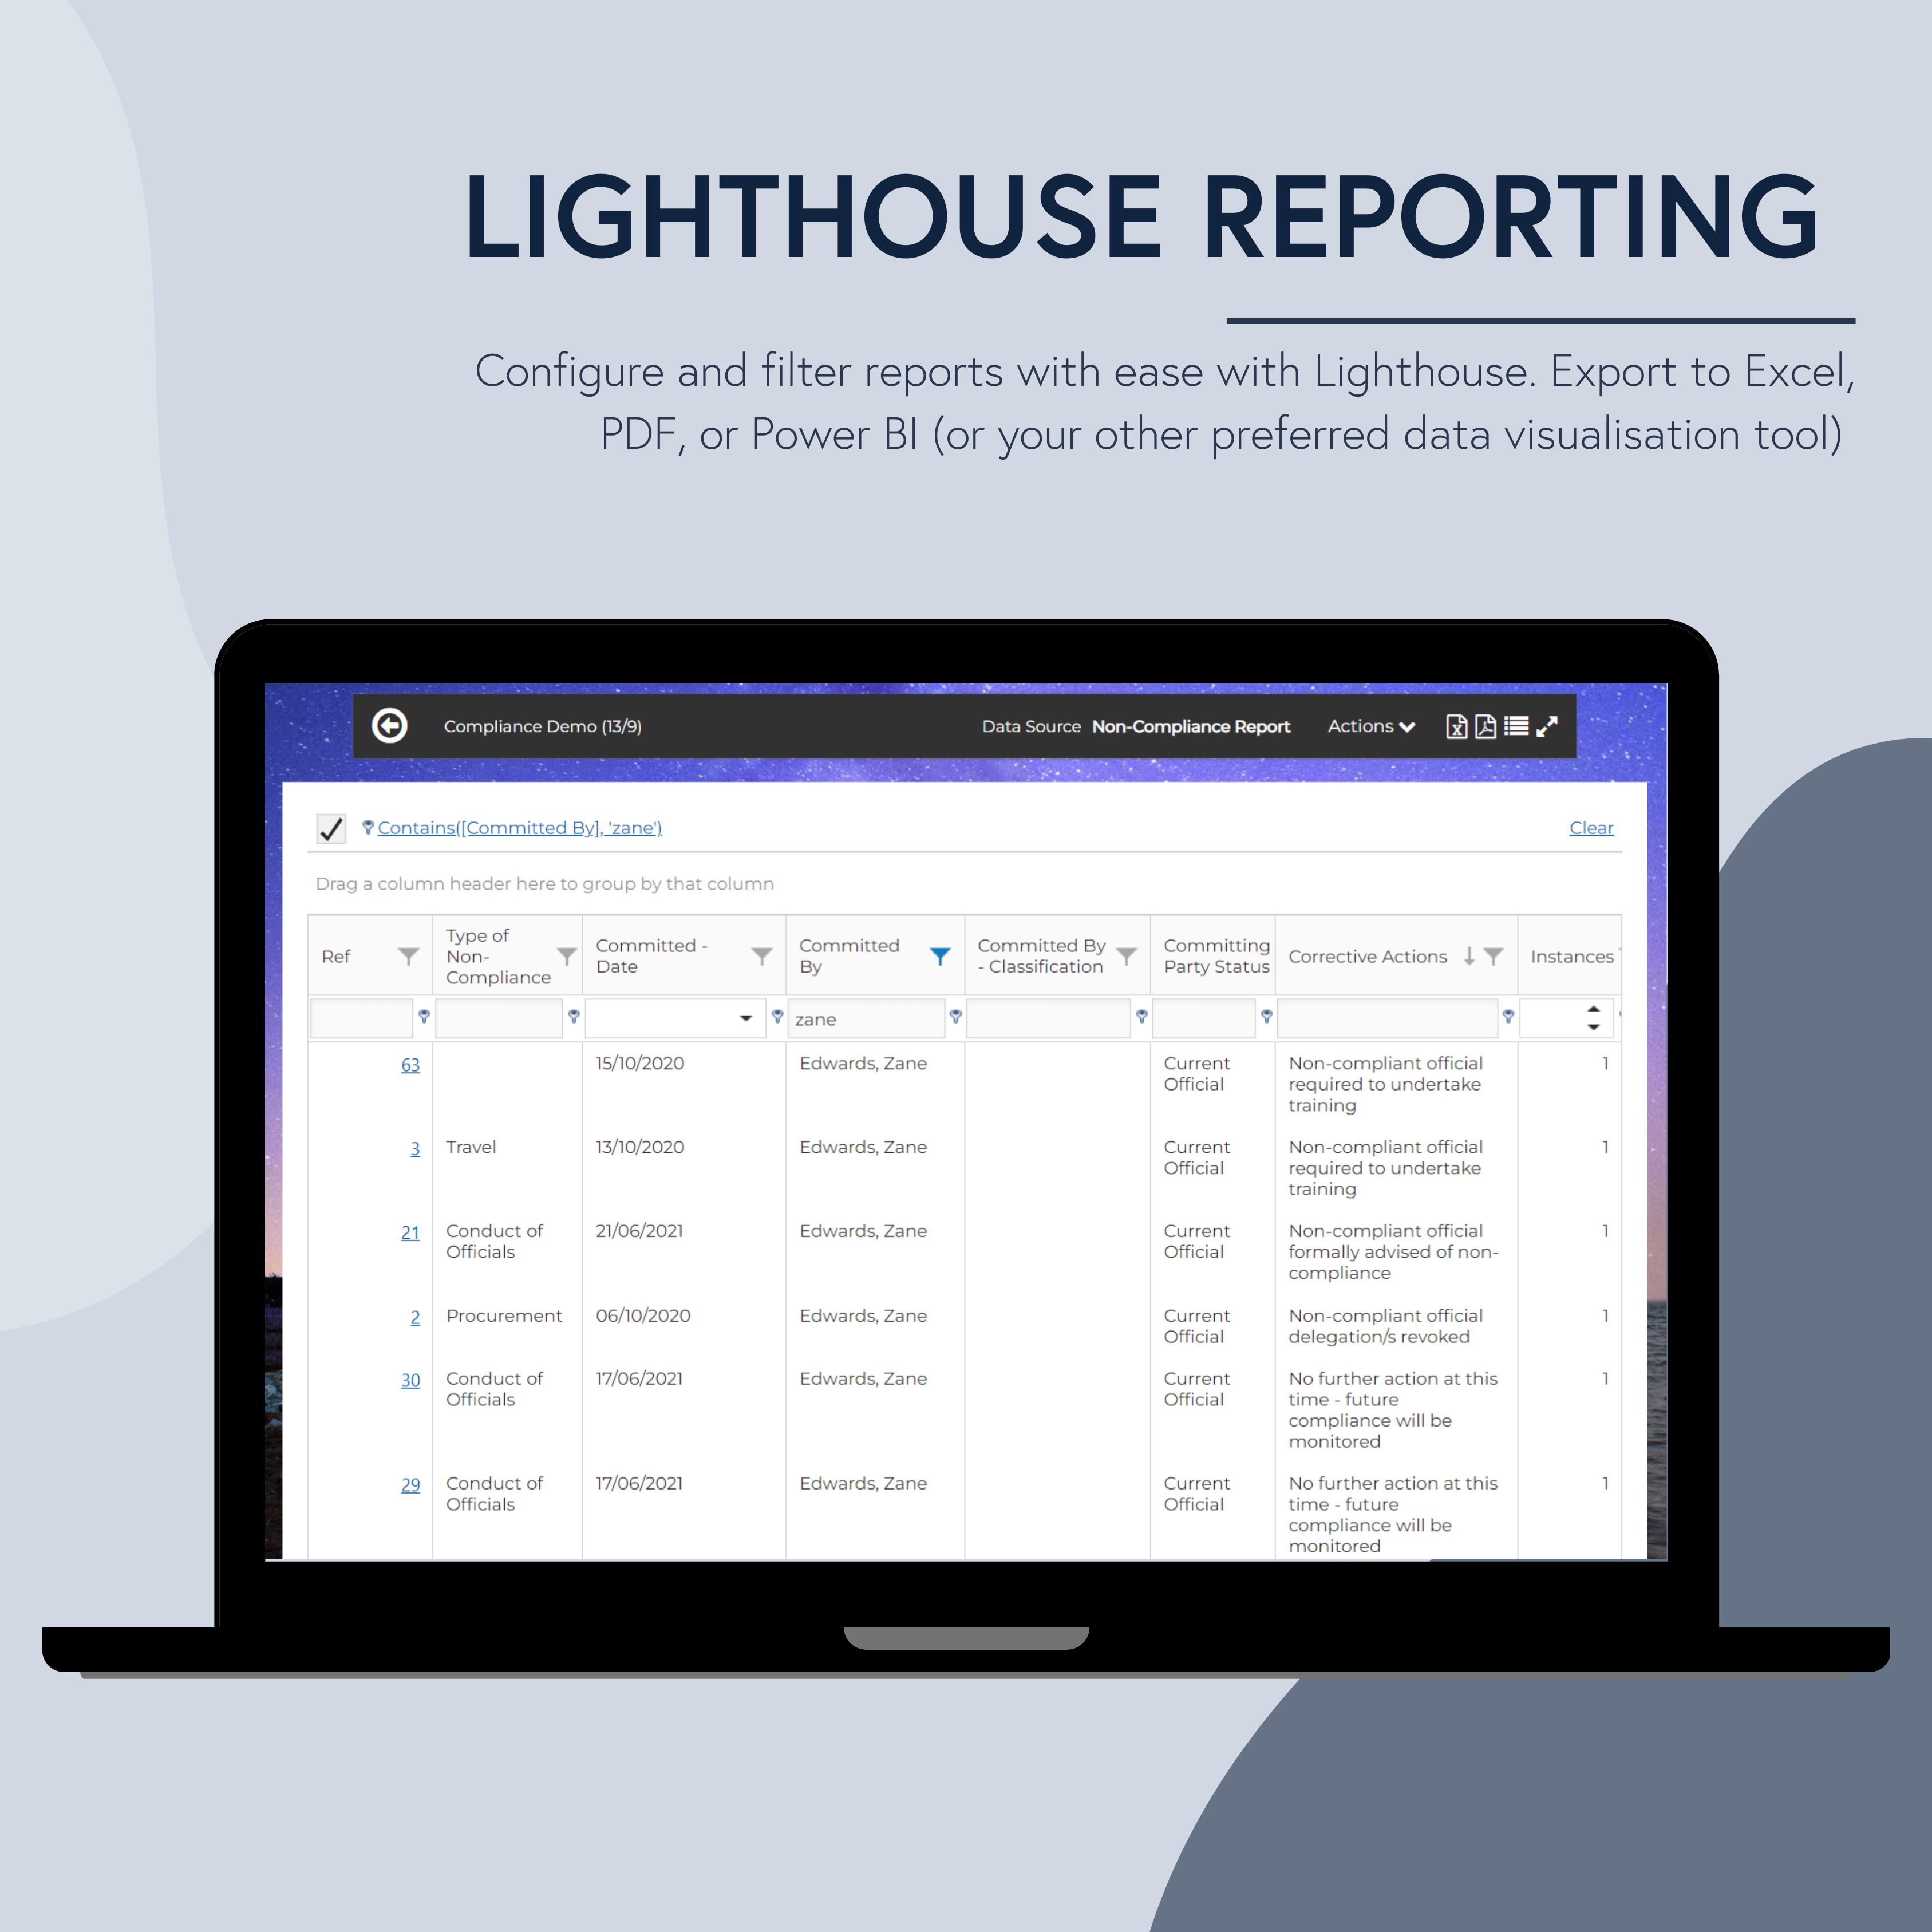 Configure and filter reports with ease with Lighthouse. Export to Excel, PDF, or Power BI (or your other preferred data visualisation tool)